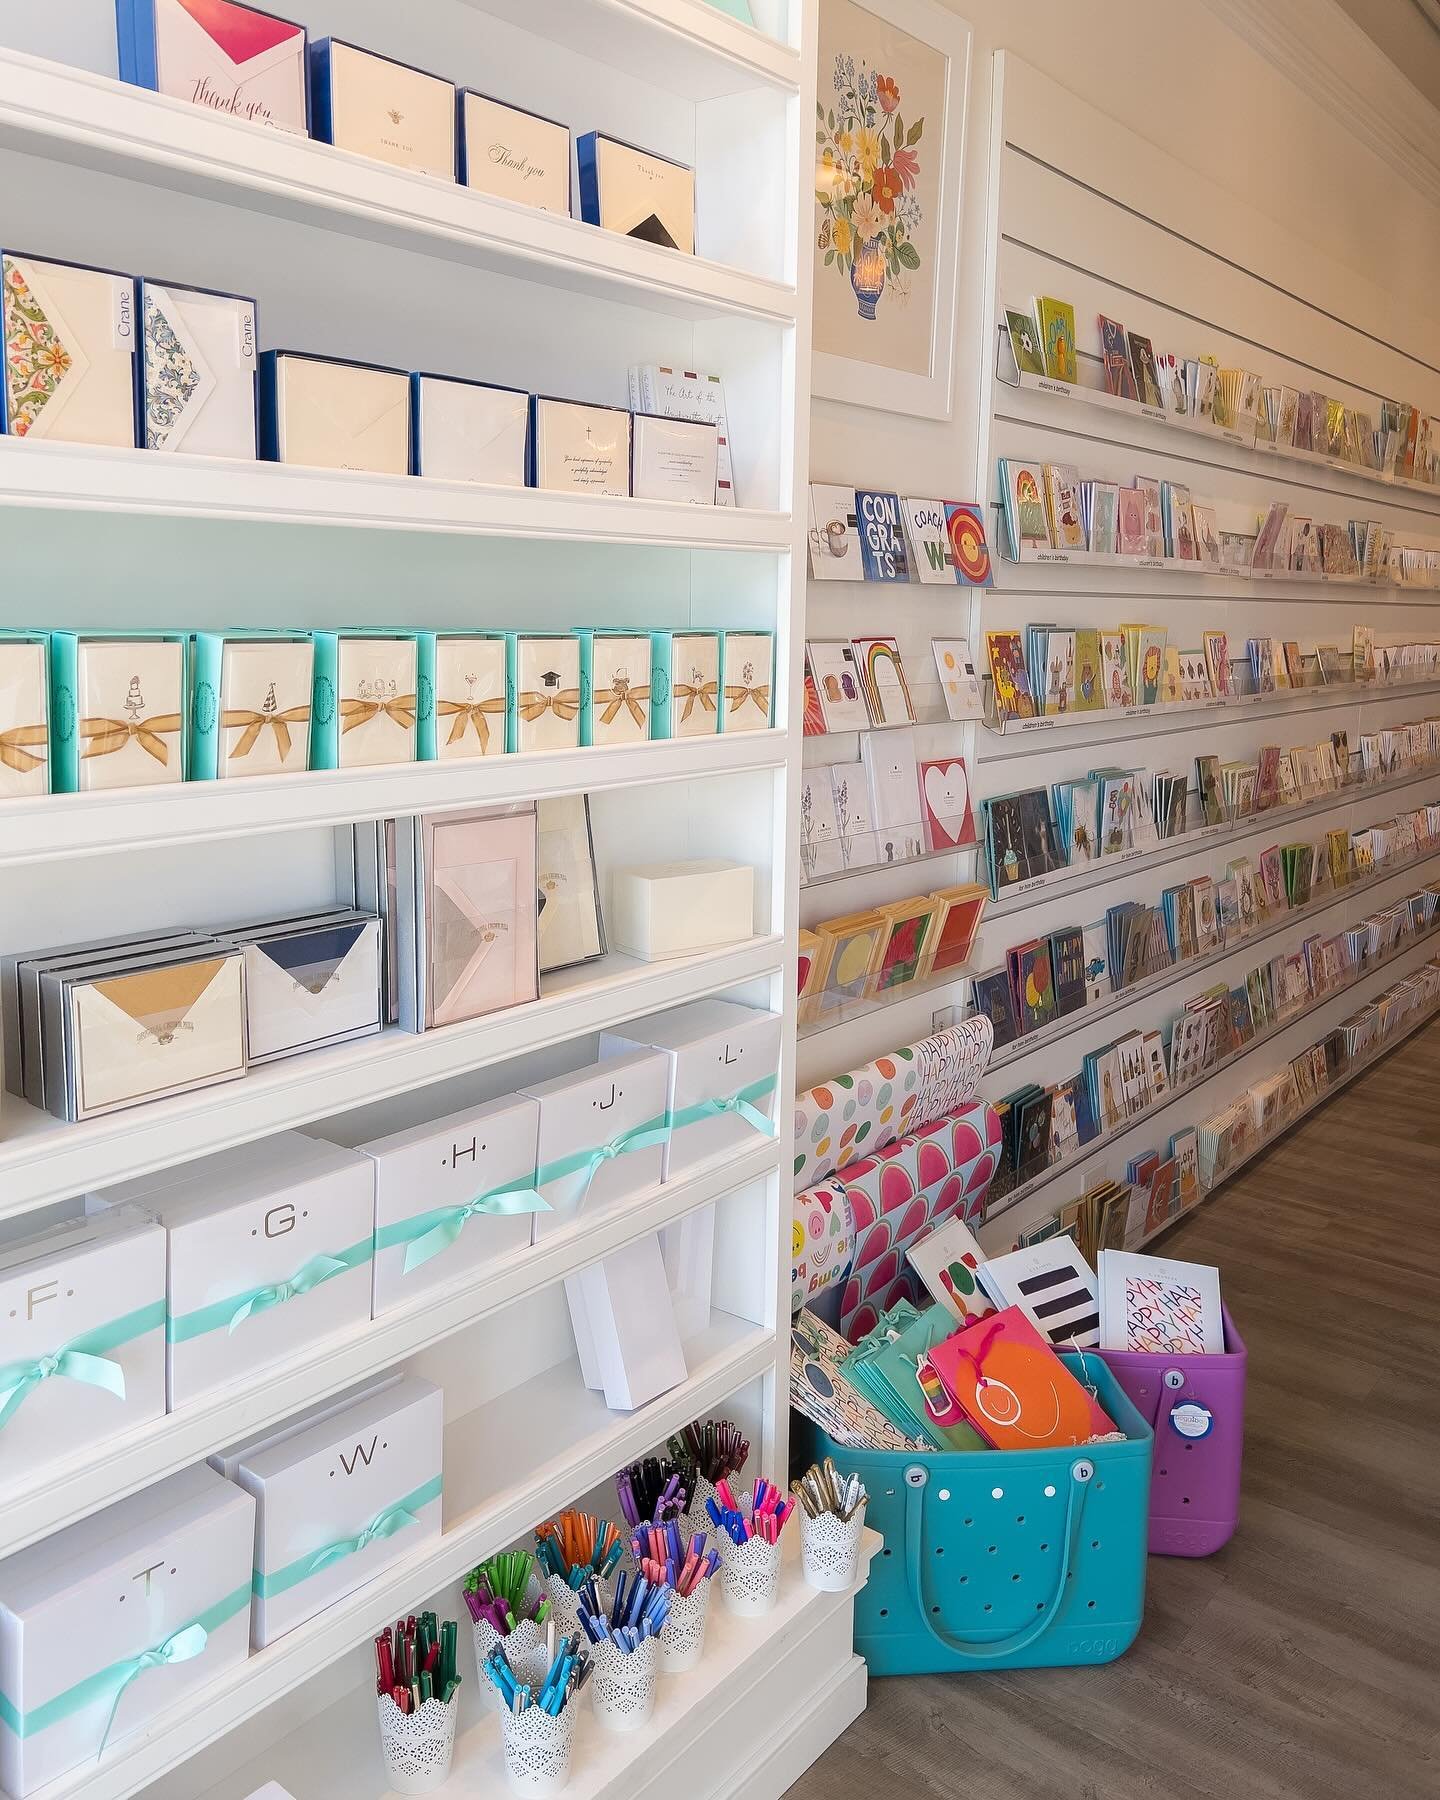 Psst! Did you know&hellip;
April is National Card &amp; Letter Writing Month! 💌✨ And boy, do we have the perfect selection! We won&rsquo;t argue, texting is convenient, but there&rsquo;s nothing quite like the feeling of receiving a handwritten note